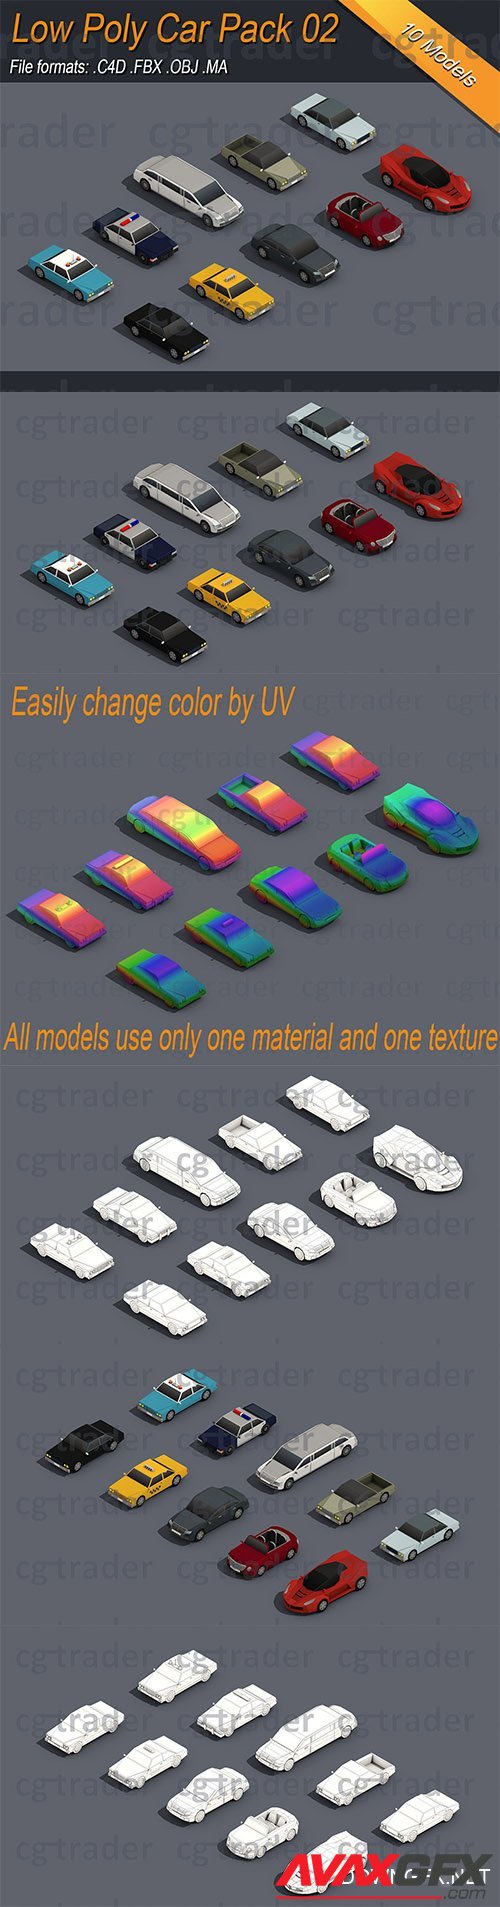 Low Poly Car Pack 02 Isometric Low-poly 3D model